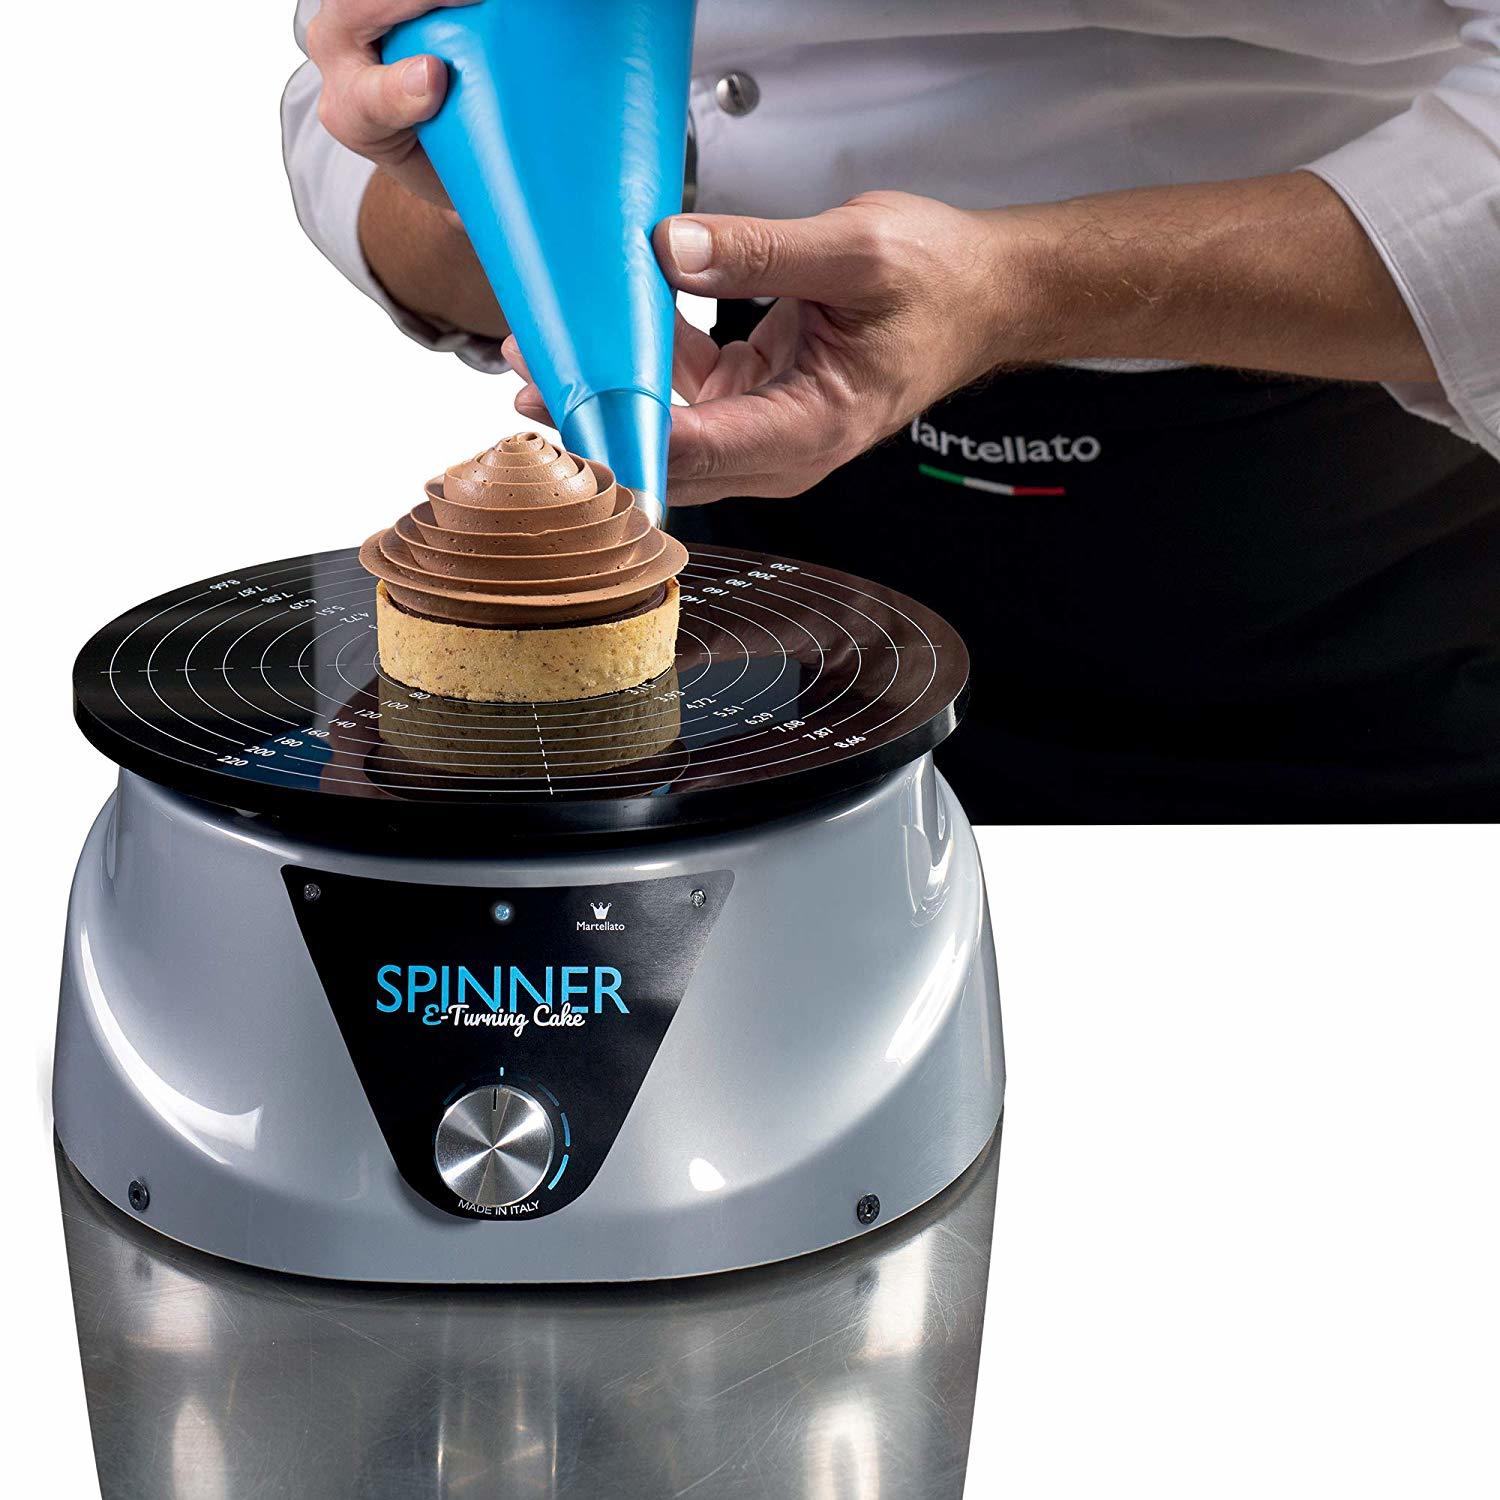 Spinner Electric Rotating Tray - Meilleur du Chef